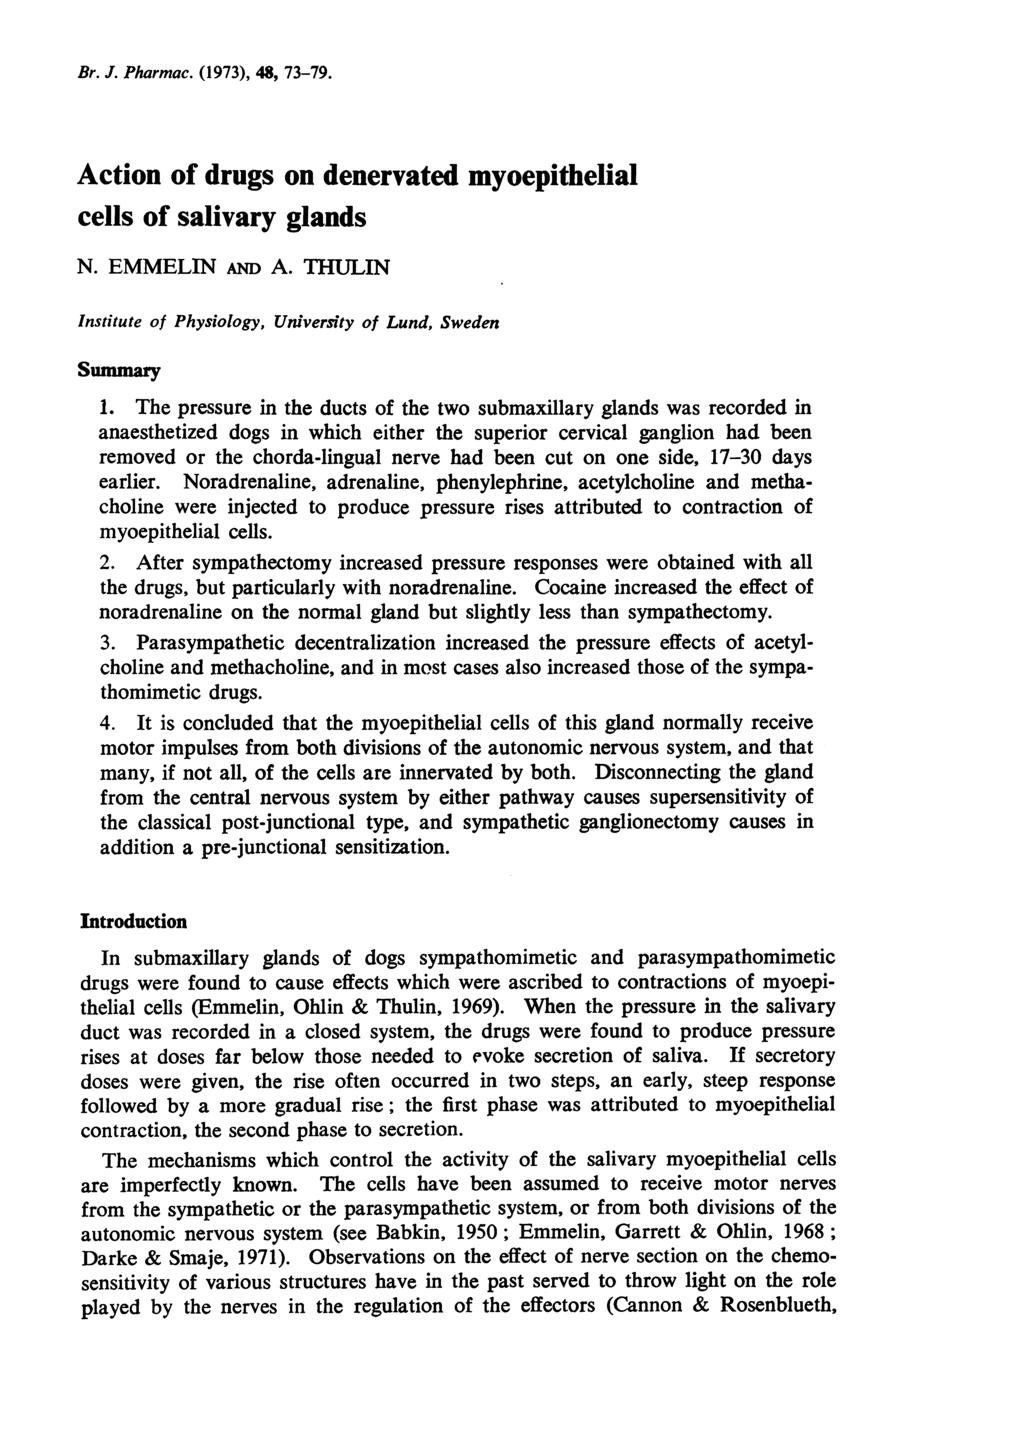 Br. J. Pharmac. (1973), 48, 73-79. Action of drugs on denervated myoepithelial cells of salivary glands N. EMMELIN AND A. THULIN Institute of Physiology, University of Lund, Sweden Summary 1.